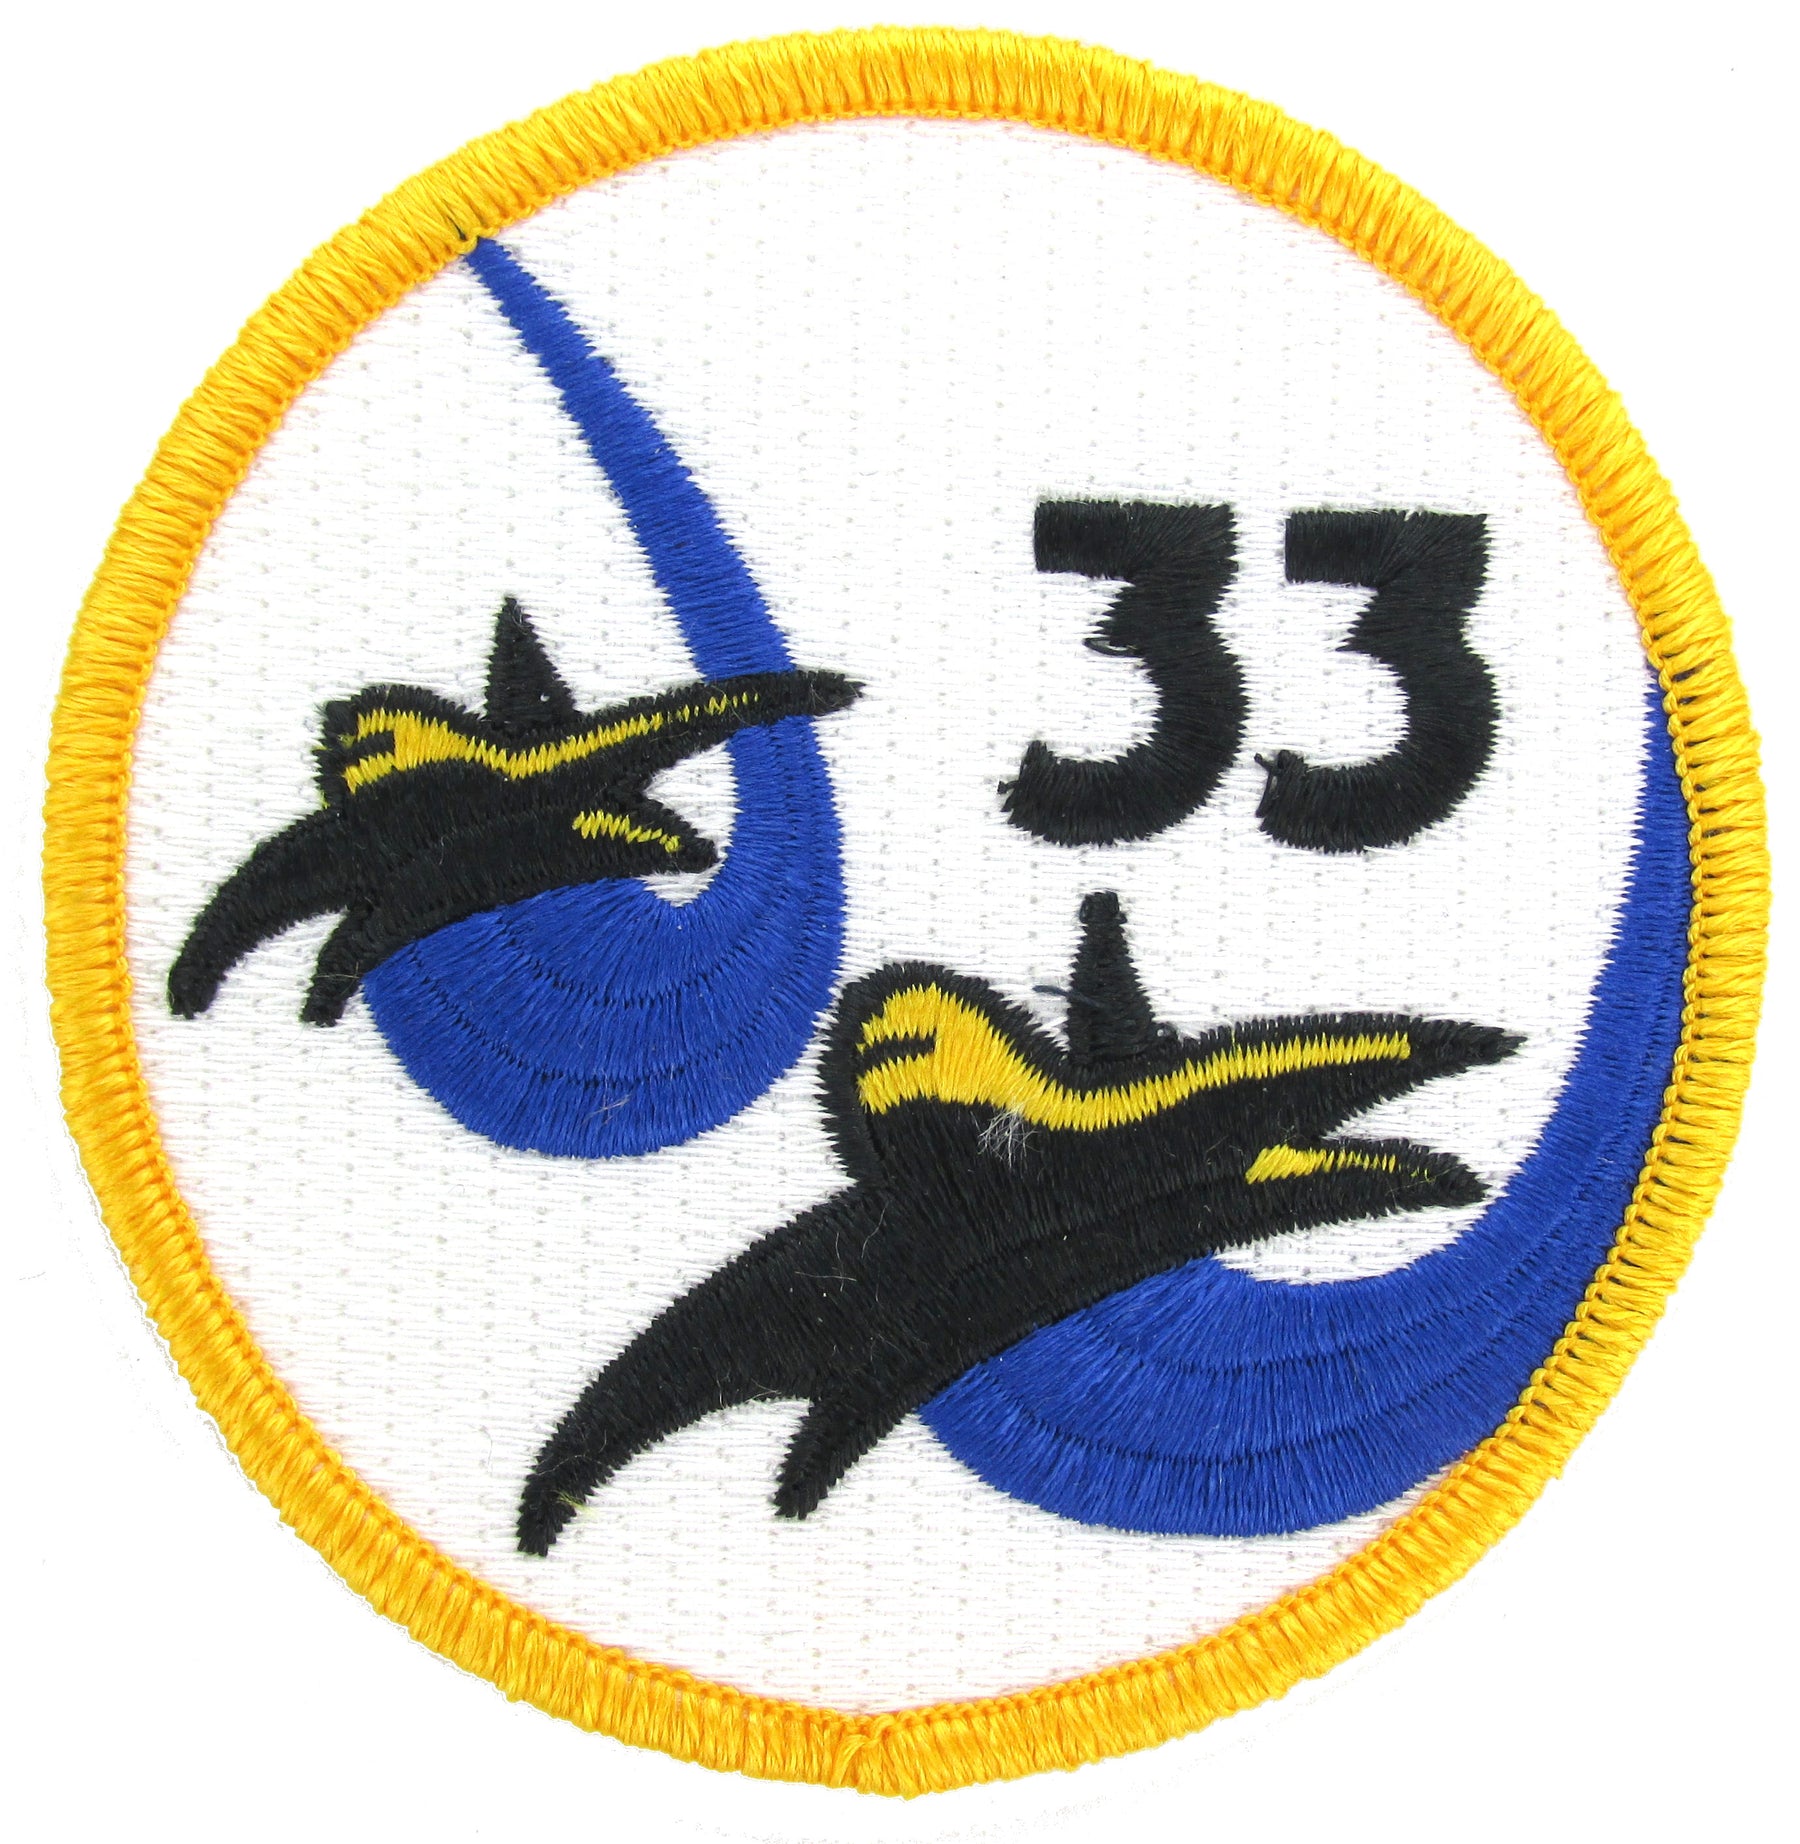 USAF Academy Patches - Air Force Cadet Squadron Patches.